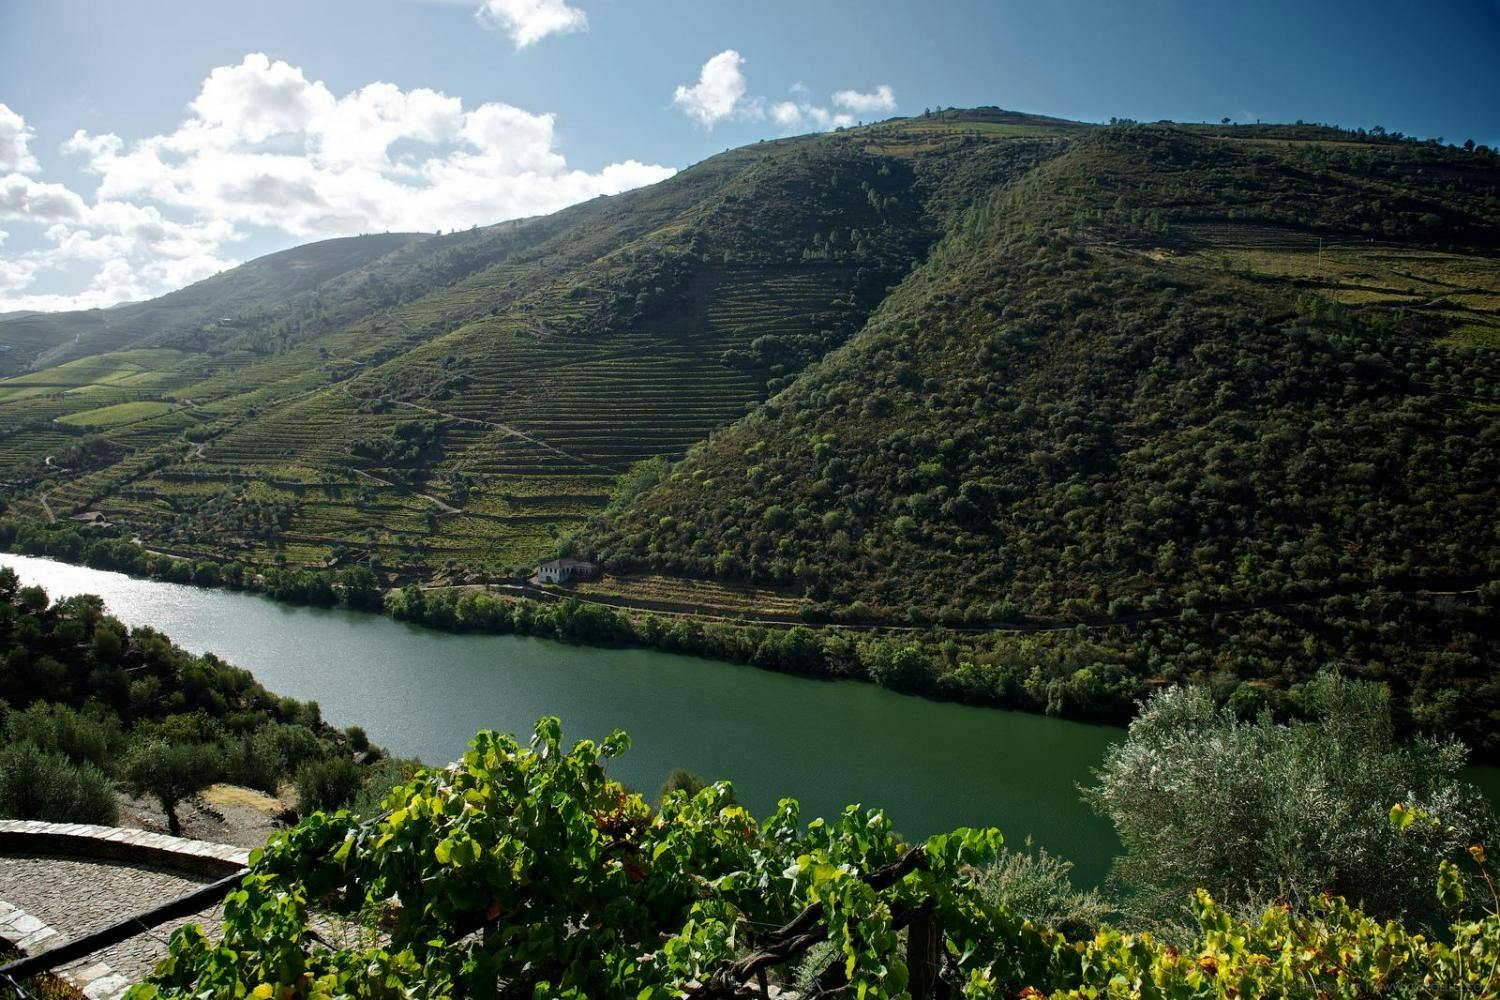 Guided tour of the Douro with river cruise and wine estates' visit